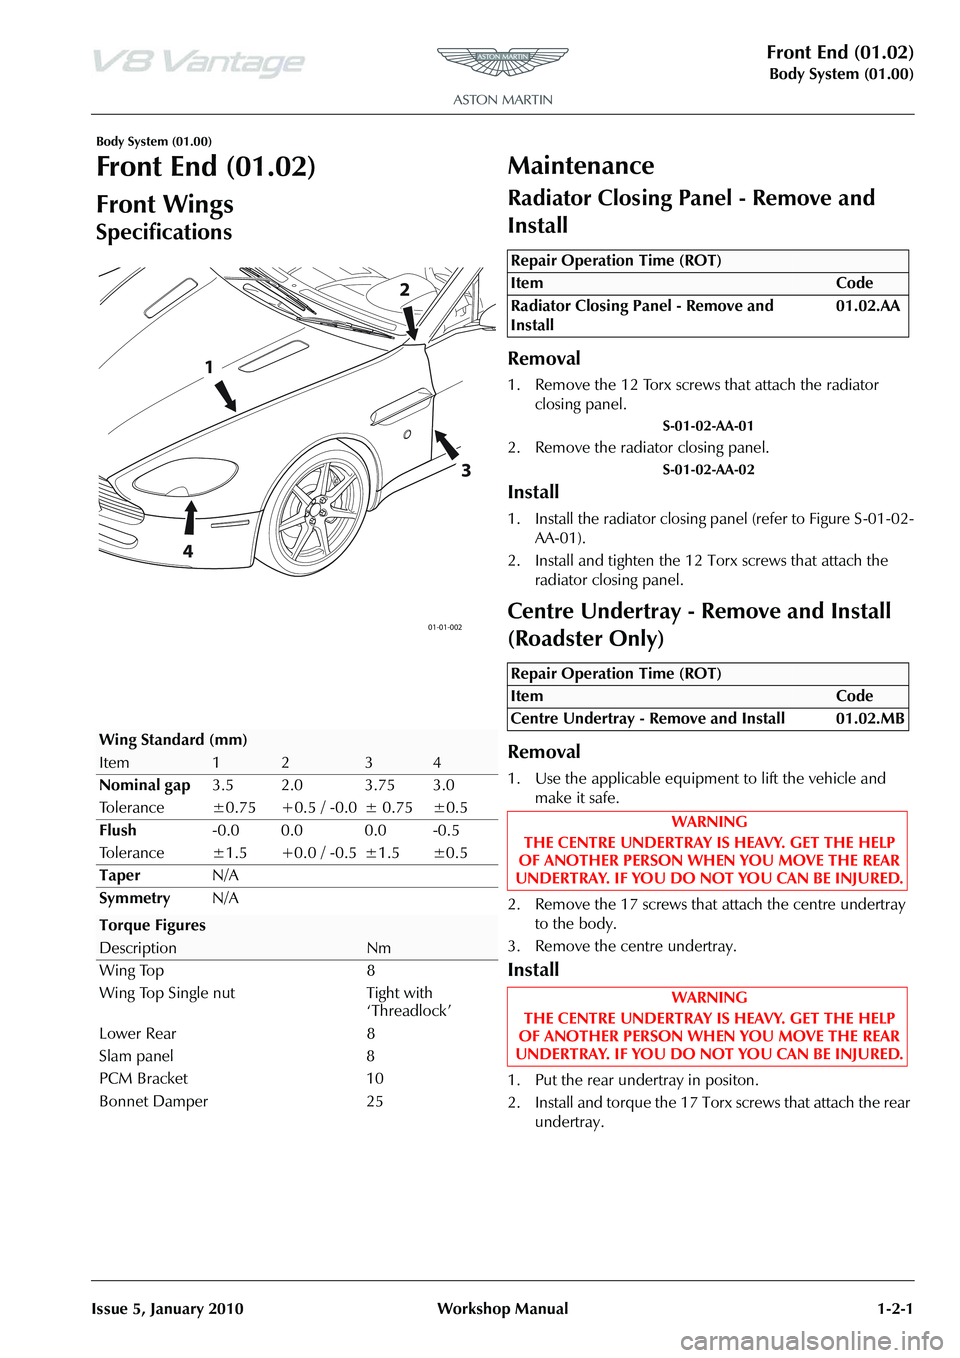 ASTON MARTIN V8 VANTAGE 2010  Workshop Manual Front End (01.02)
Body System (01.00)
Issue 5, January 2010 Workshop Manual 1-2-1
Body System (01.00)
Front End (01.02)
Front Wings
Specifications
Maintenance
Radiator Closing Panel - Remove and 
Inst